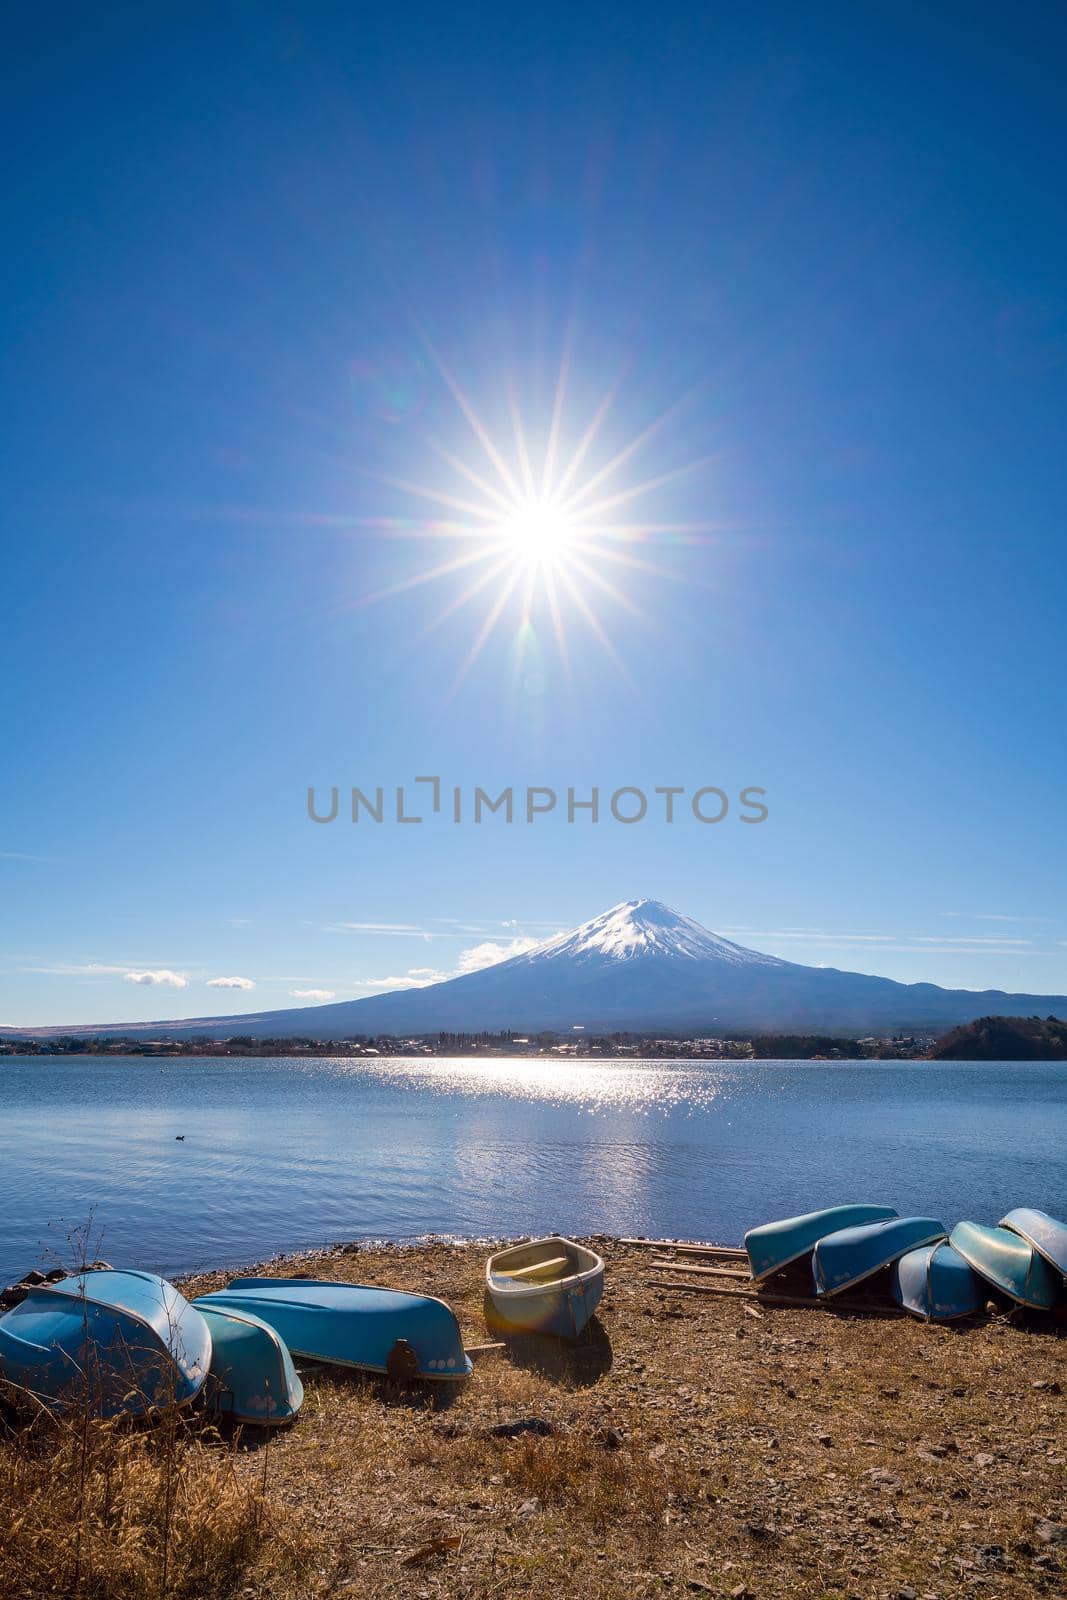 Sun star effect shot with Mountain Fuji and boats  by f11photo